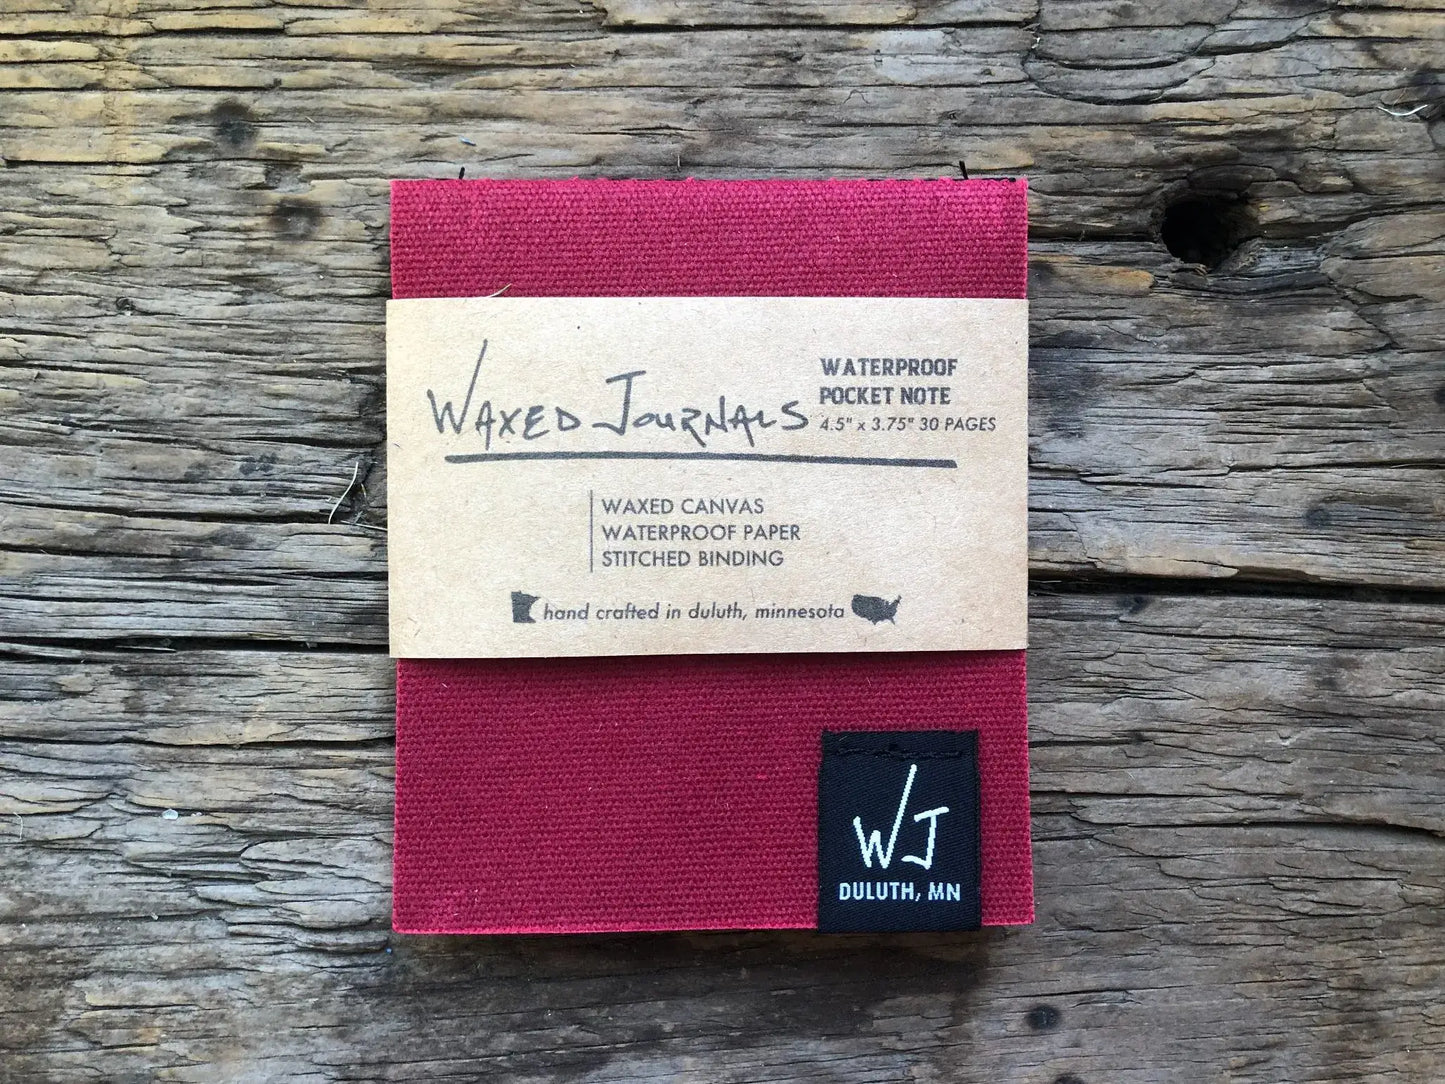 Red waxed journal notepad in packaging on wood.